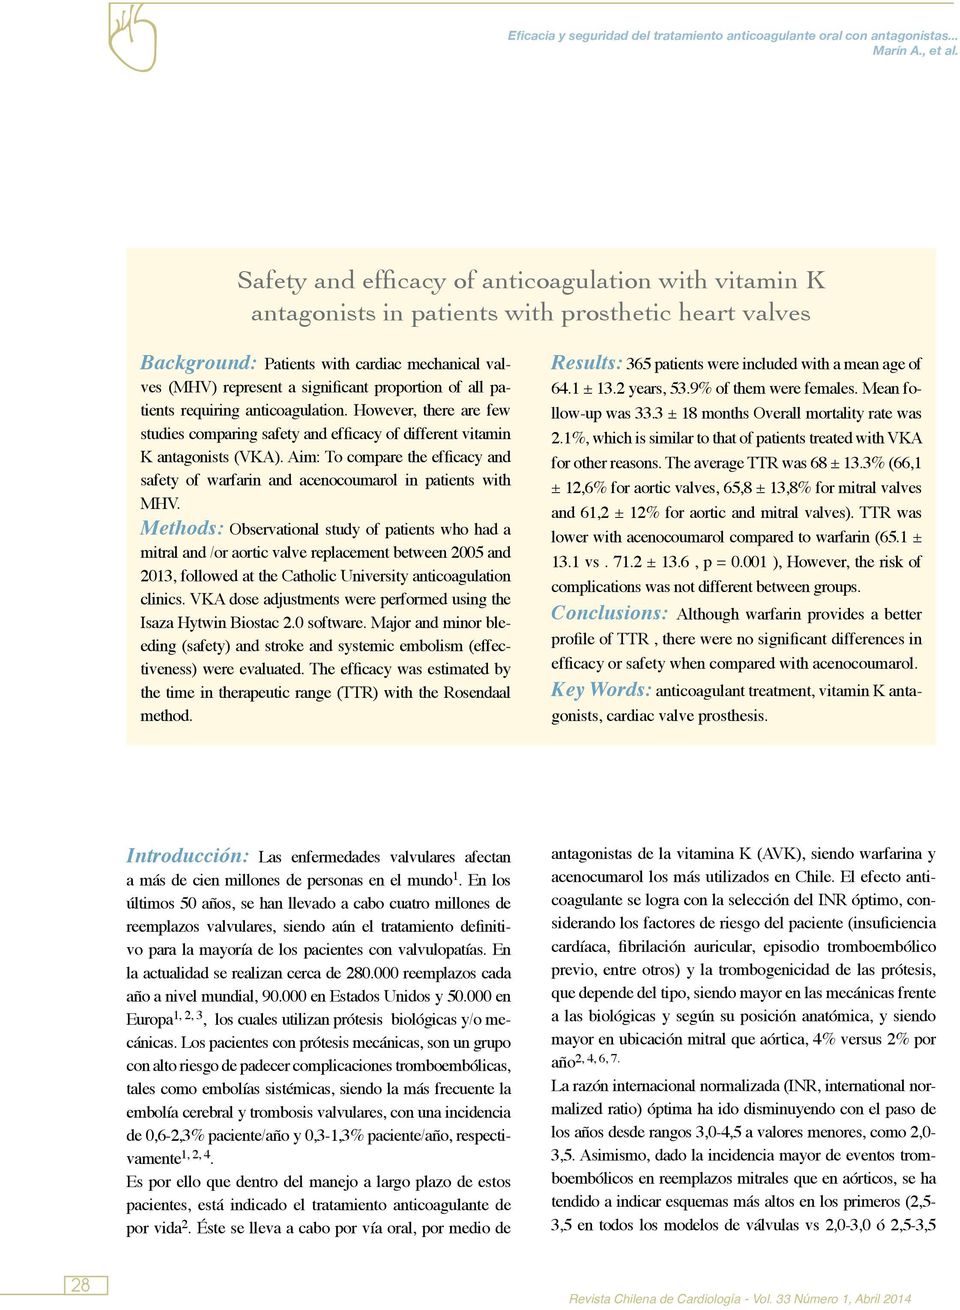 Aim: To compare the efficacy and safety of warfarin and acenocoumarol in patients with MHV.